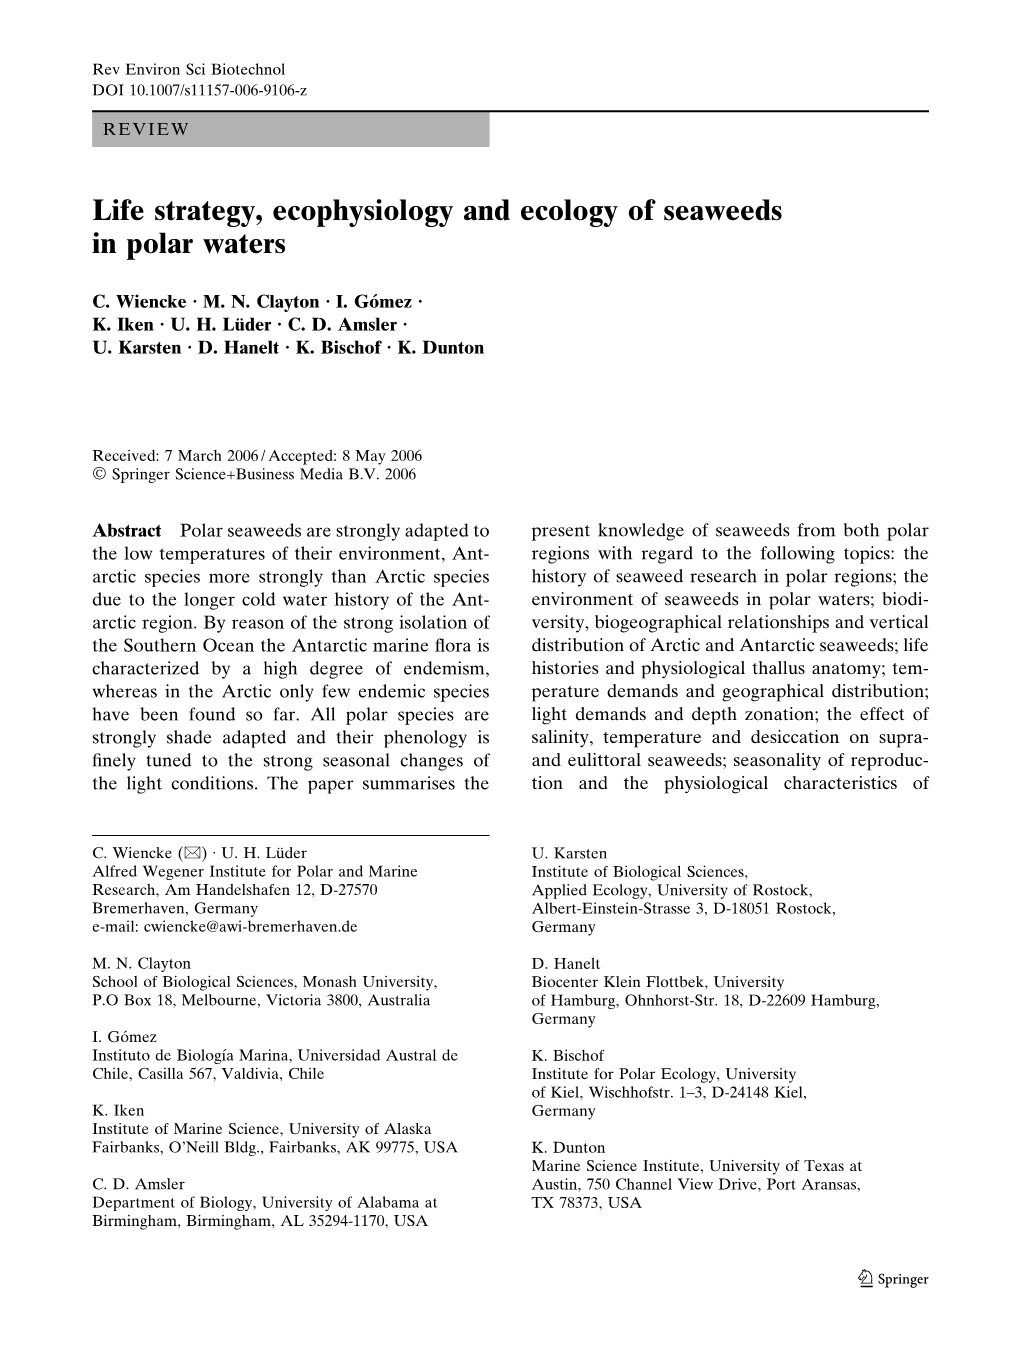 Life Strategy, Ecophysiology and Ecology of Seaweeds in Polar Waters